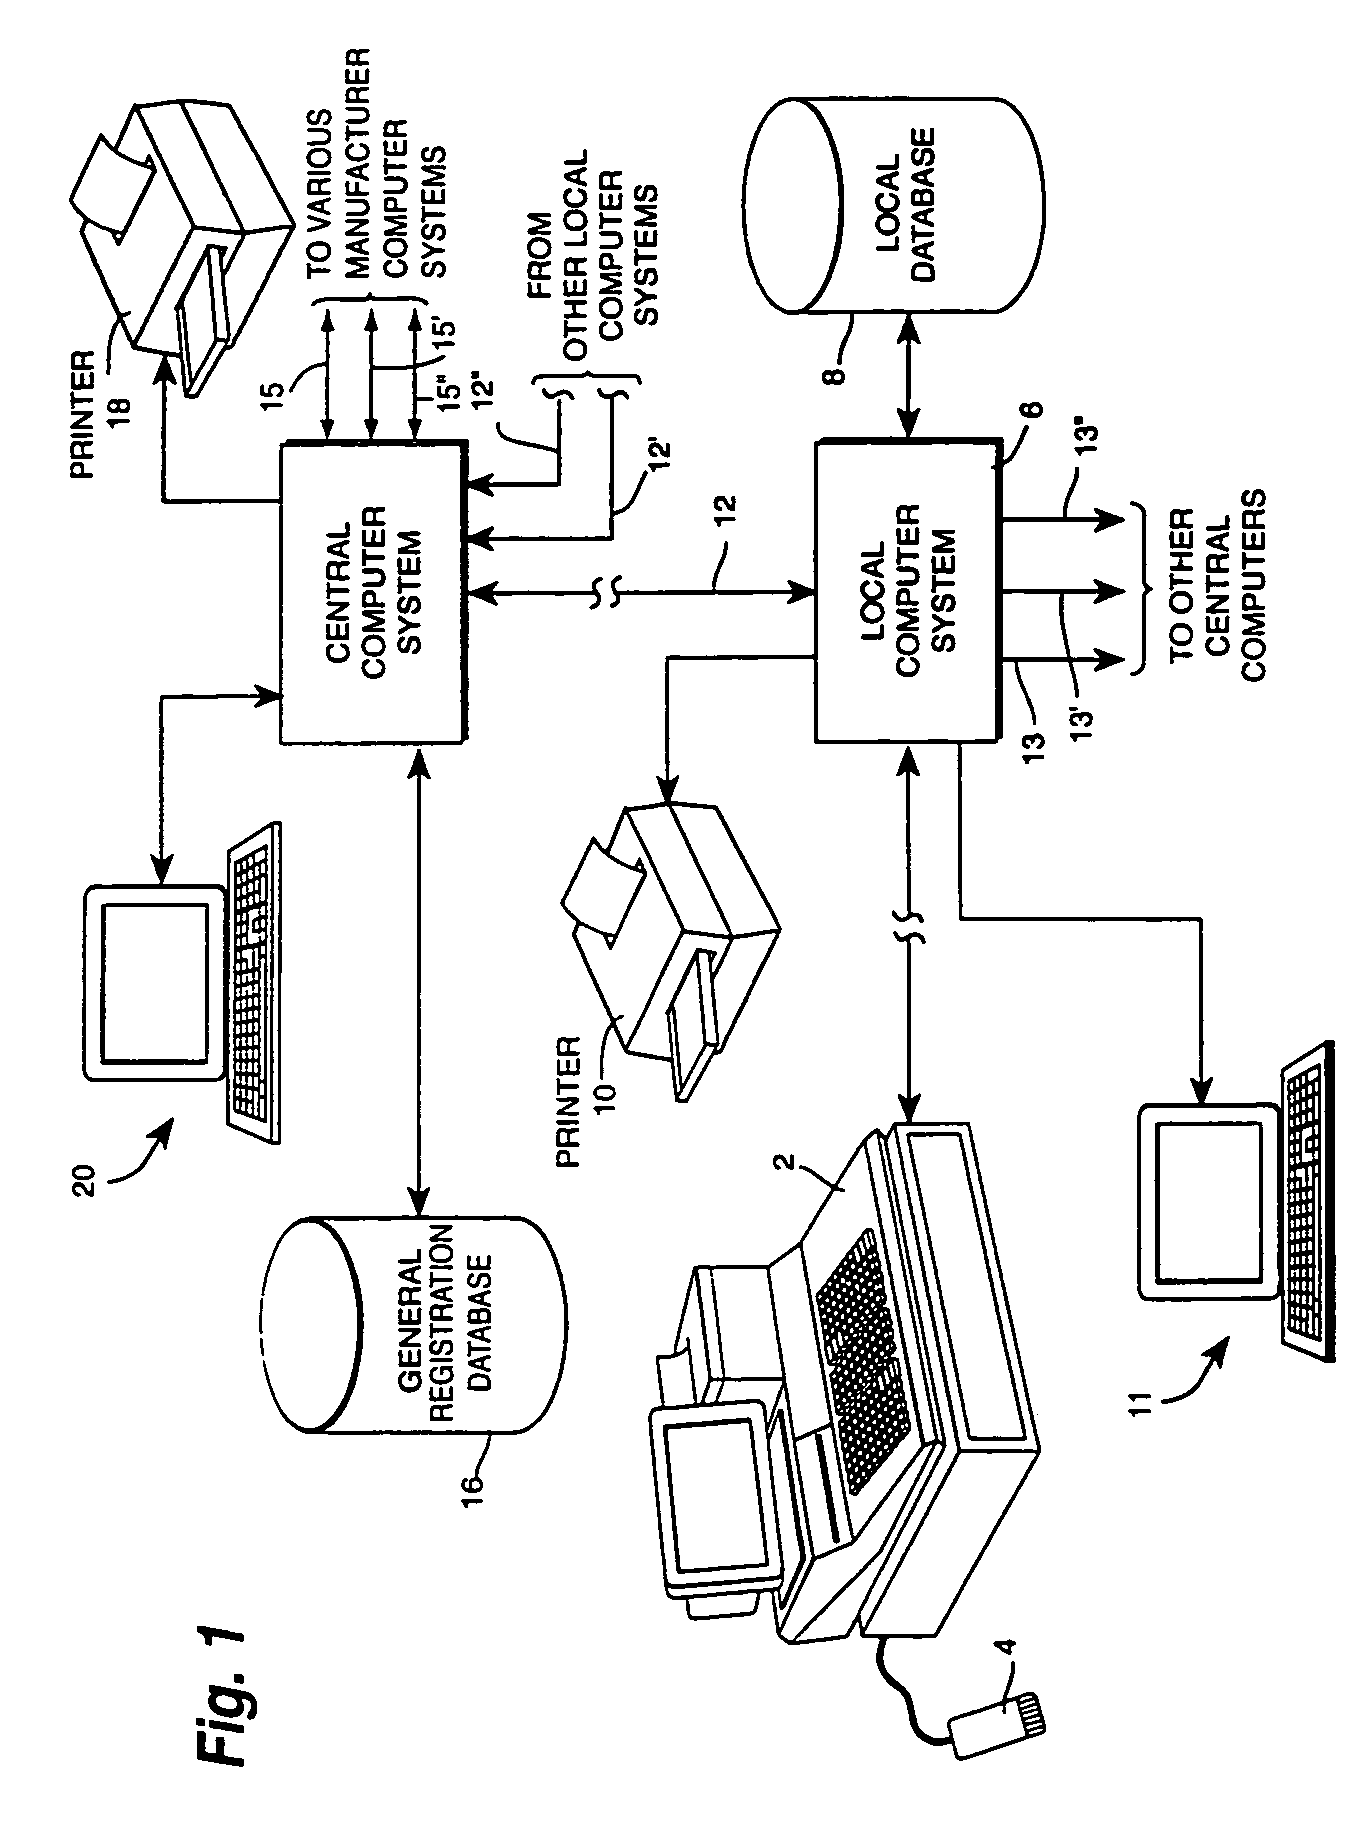 Method and apparatus for verifying product sale transactions and processing product returns